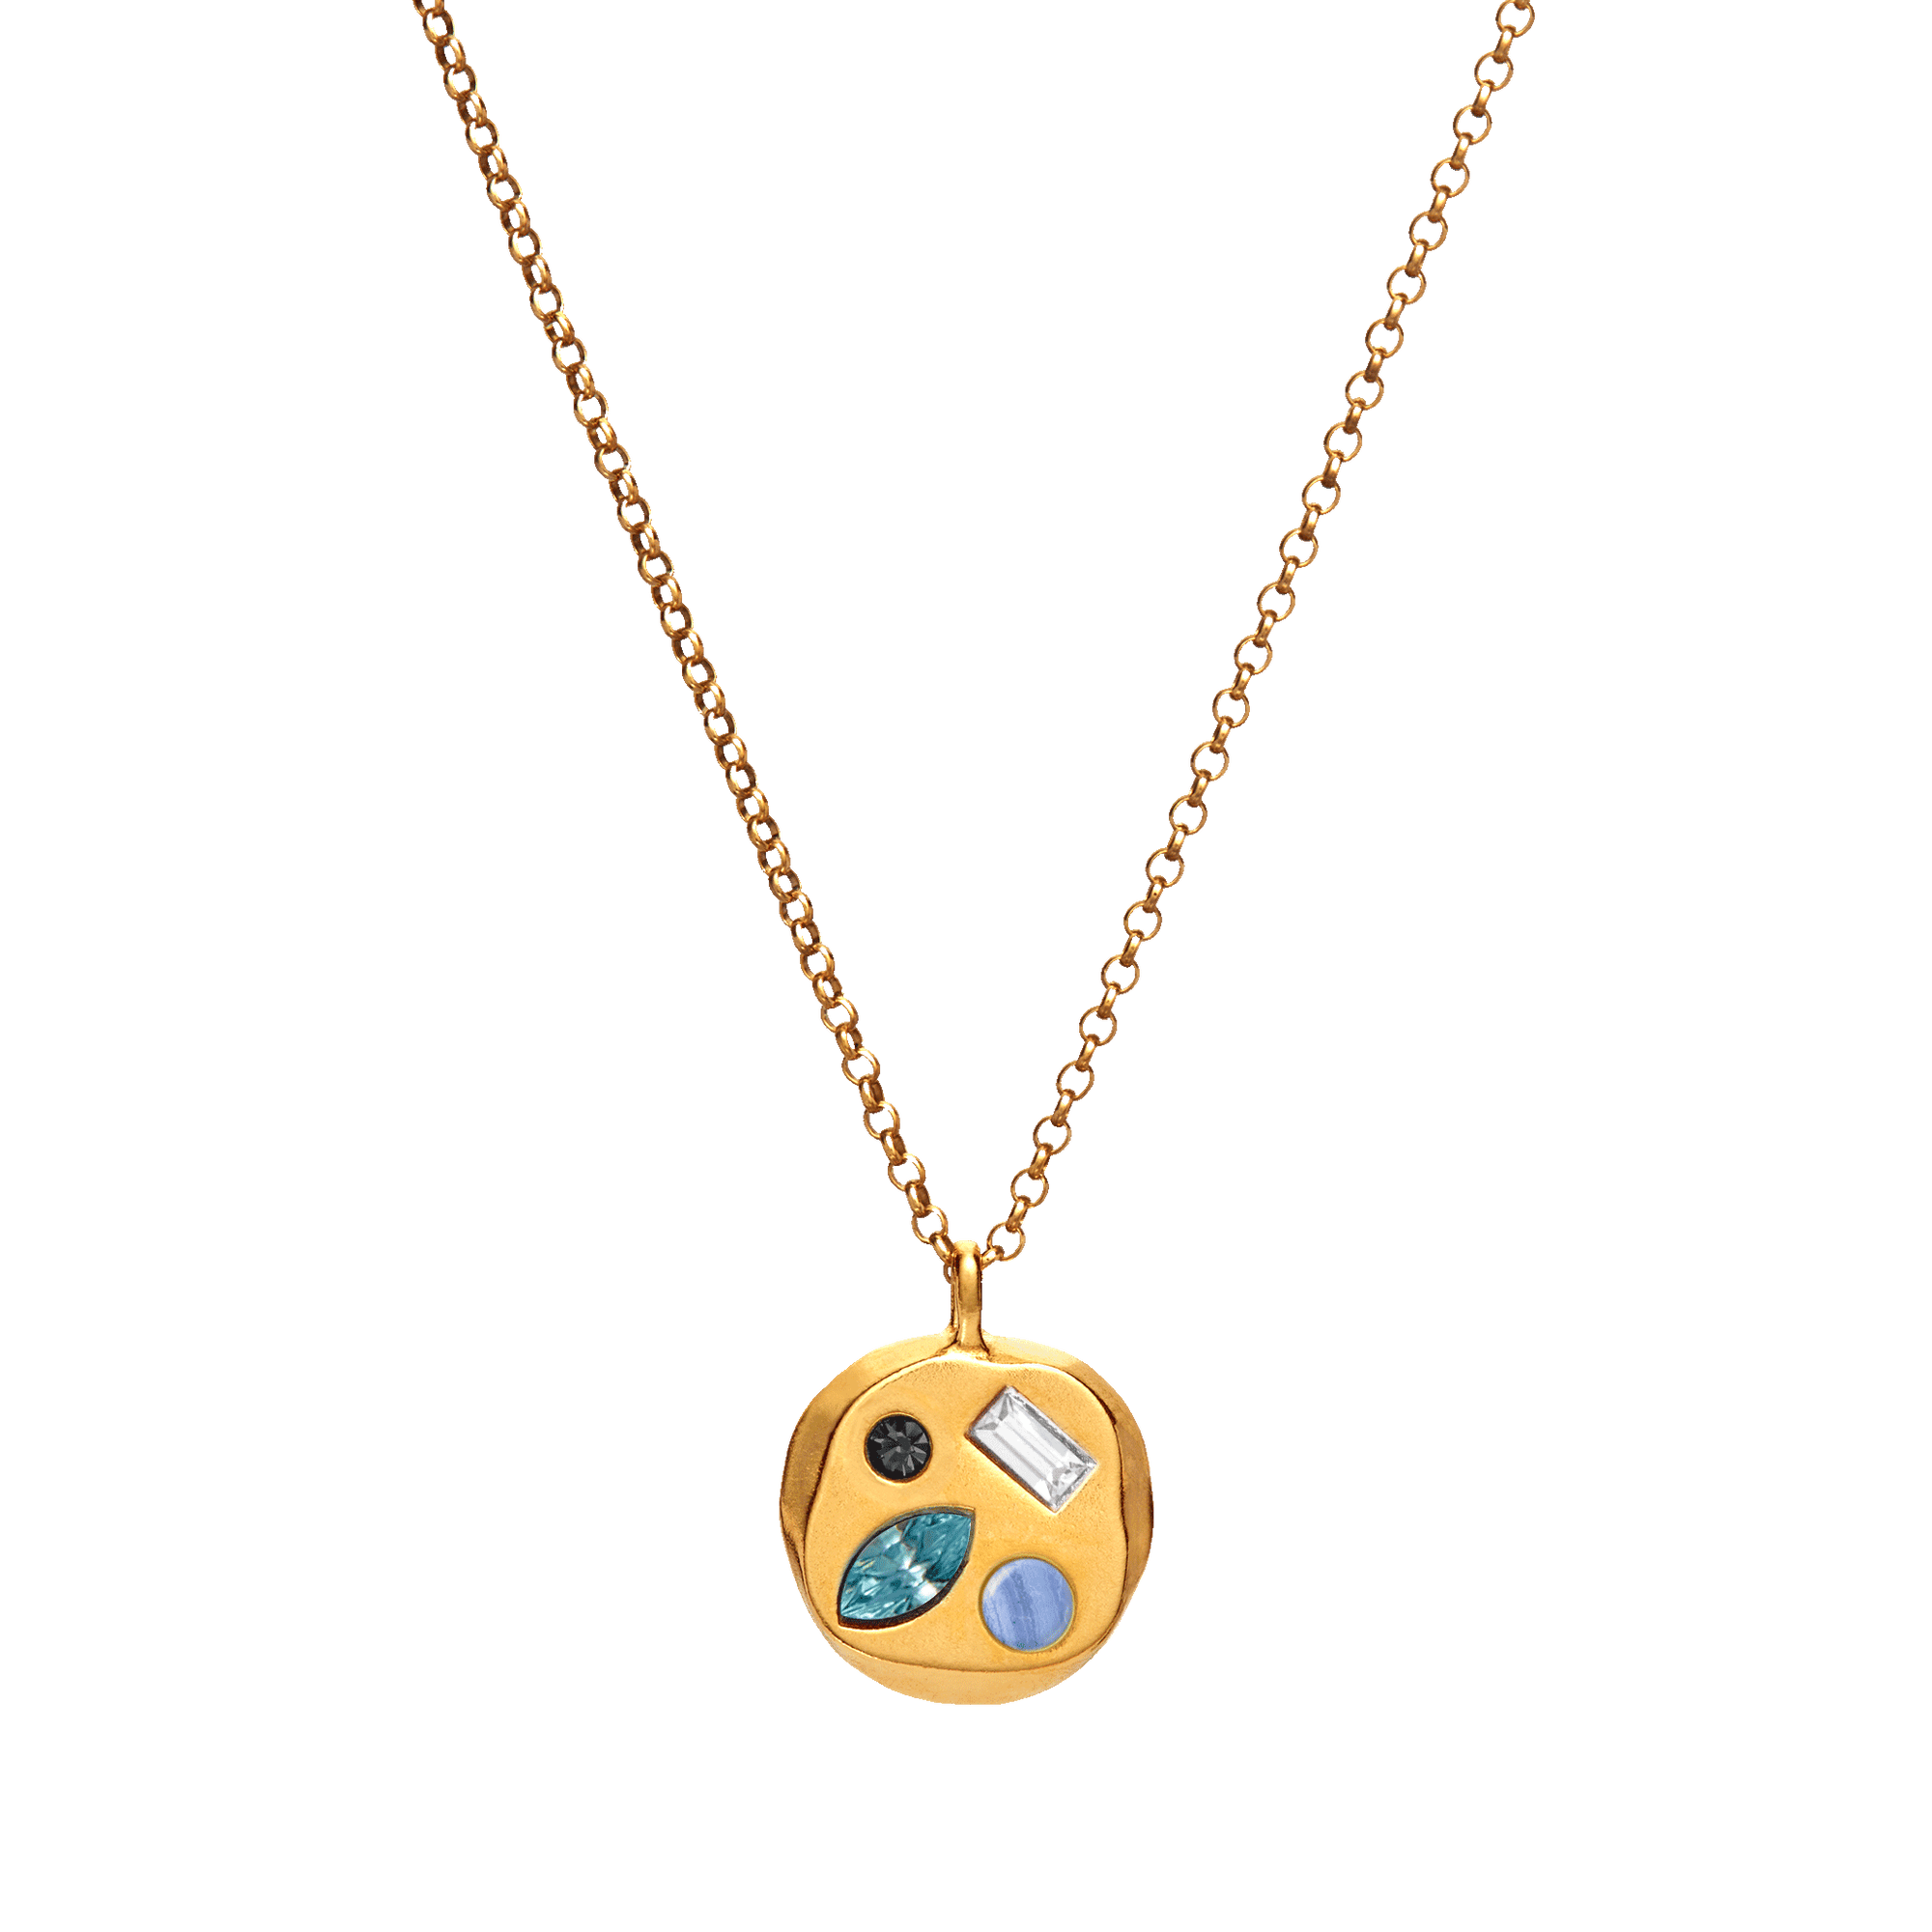 The March Fifteenth Pendant